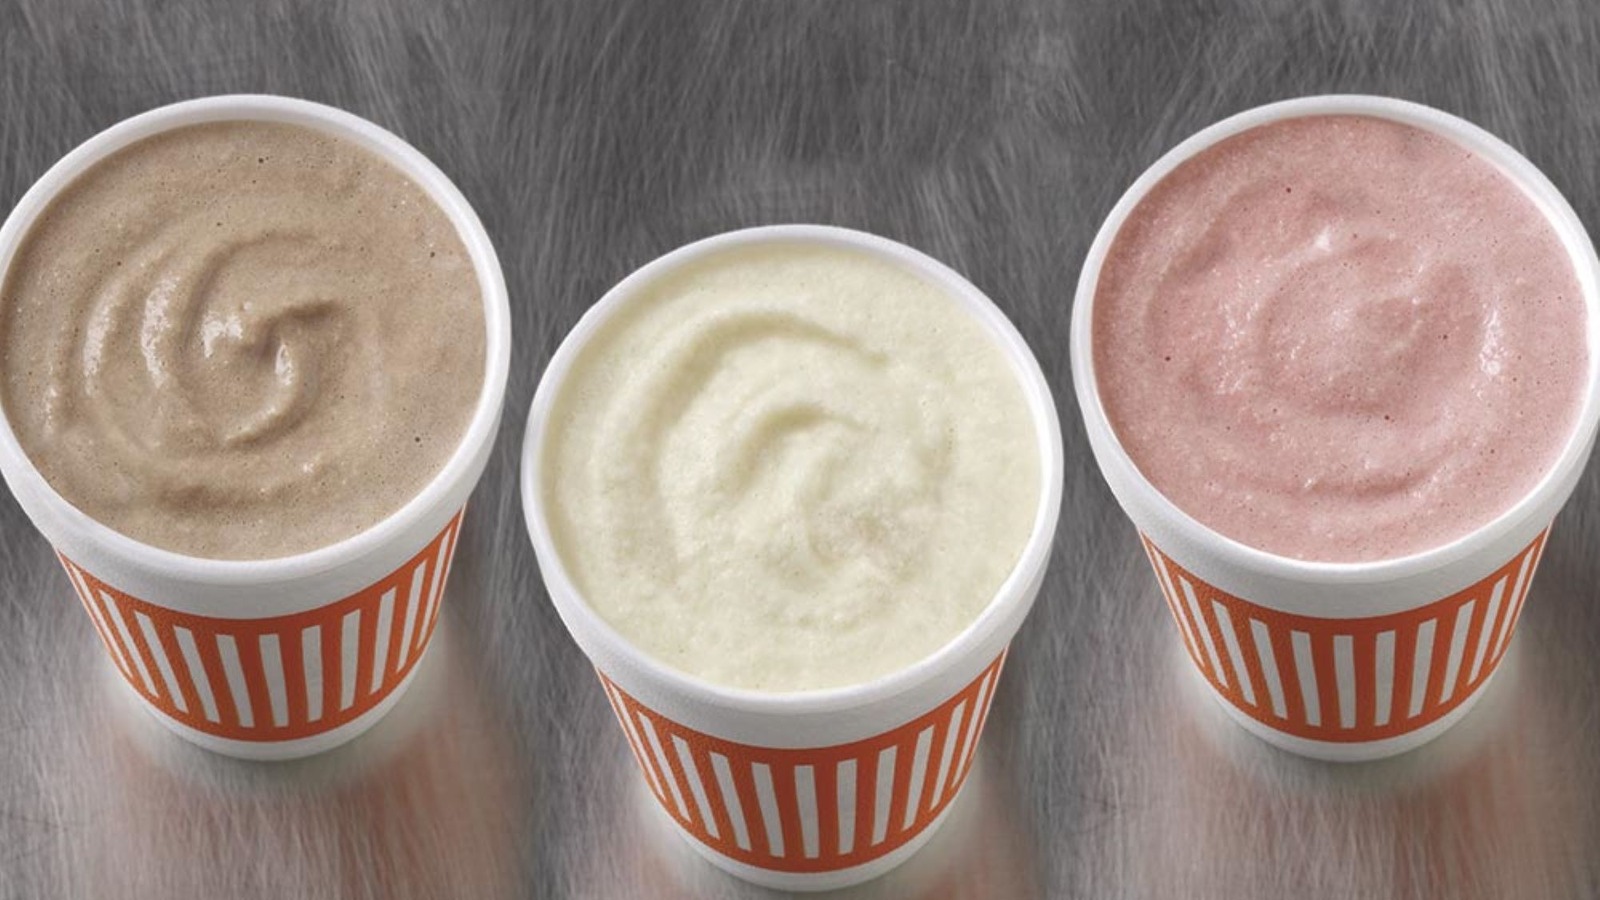 Whataburger's New Shake Flavor Is A Twist On A Southern Delight